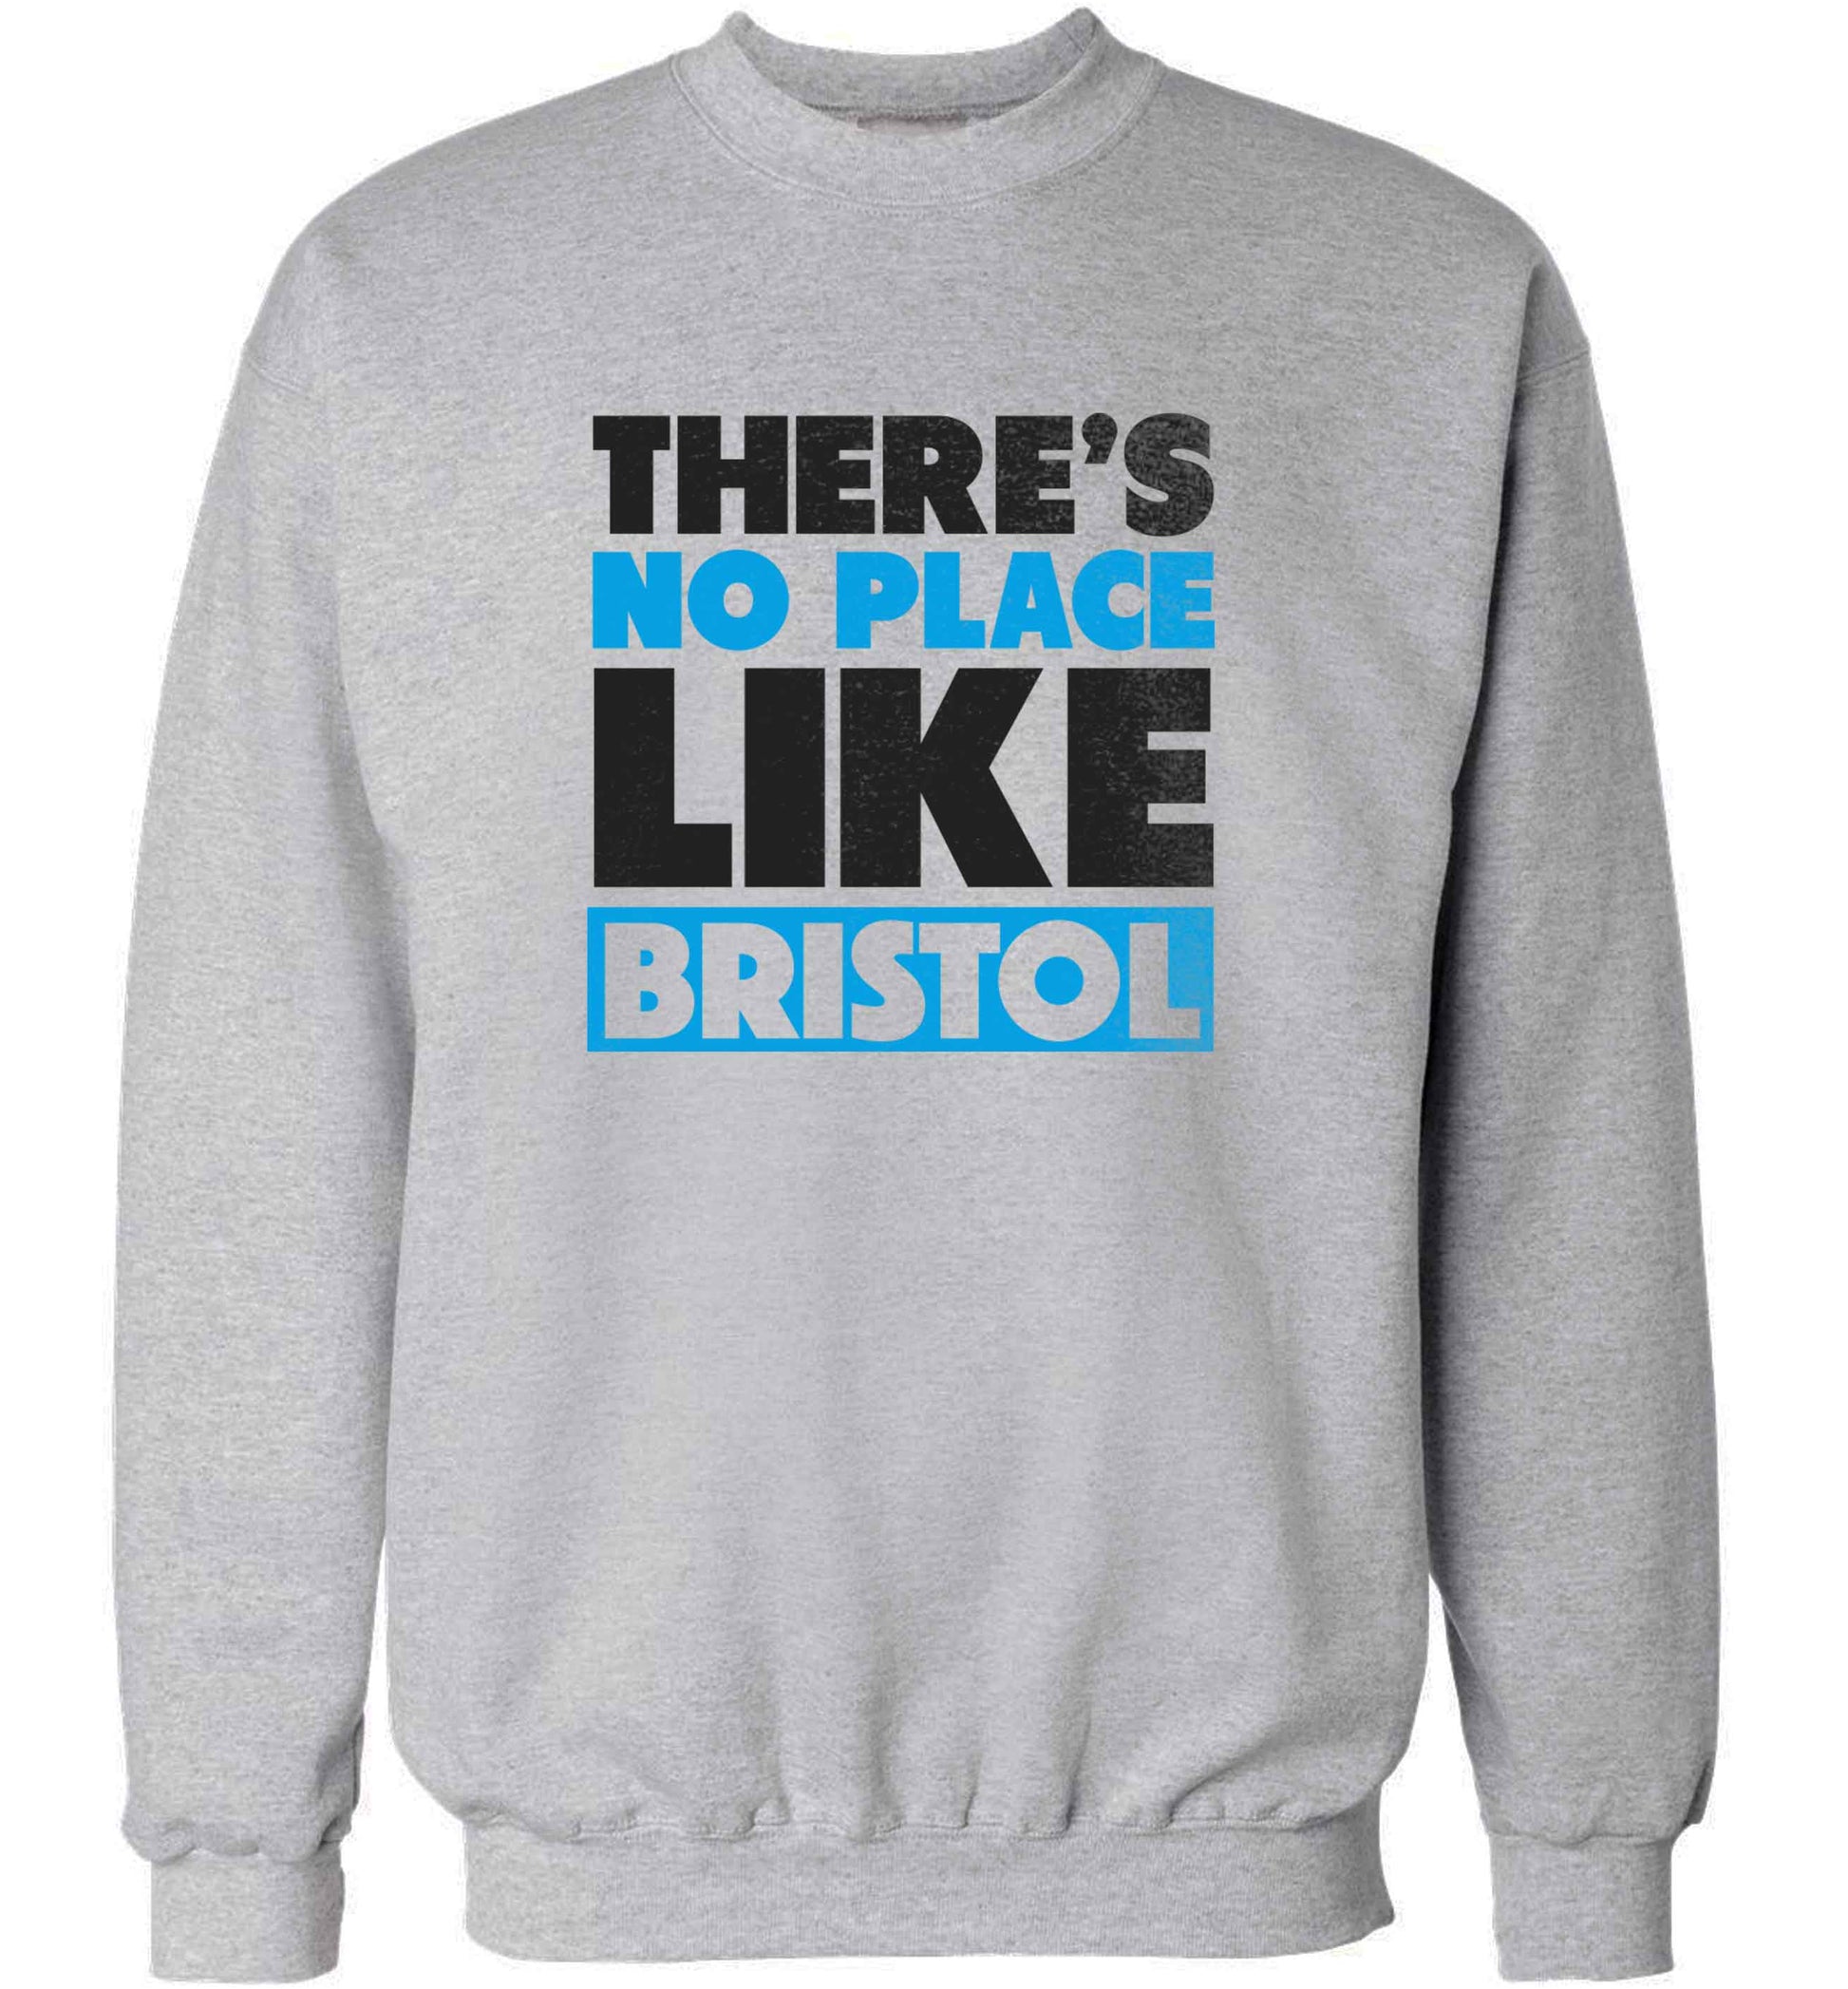 There's no place like Bristol adult's unisex grey sweater 2XL